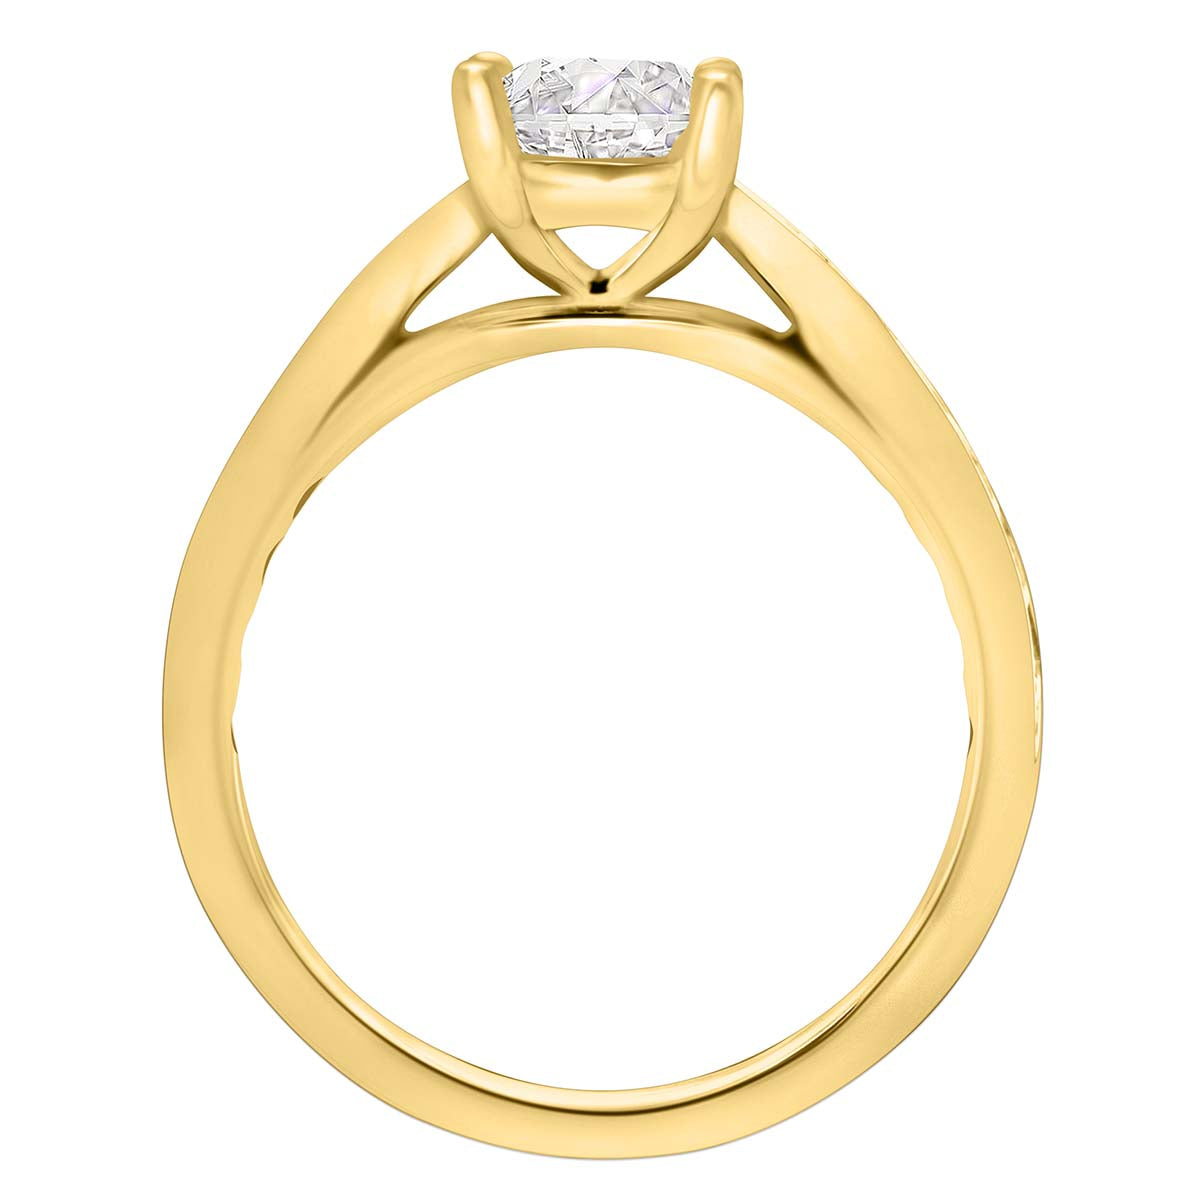 Princess Cut Diamond Solitaire with tapered diamond band in yellow gold stqanding upright